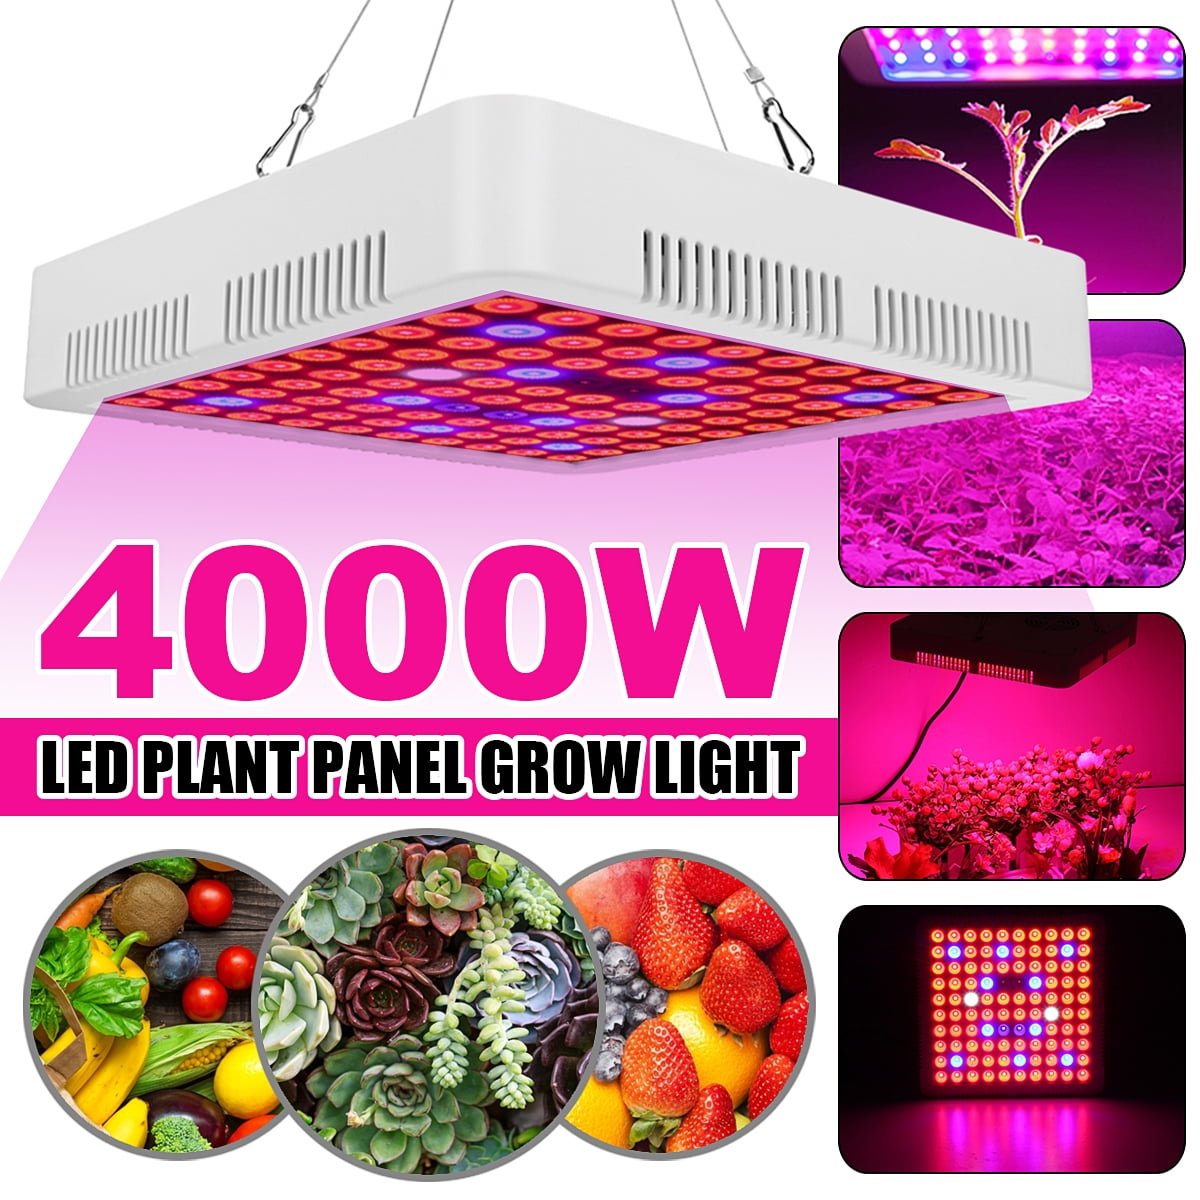 Details about   1200W 120LED Plant Grow Light Lamp For Greenhouse Indoor Plants Flower 85-265V. 